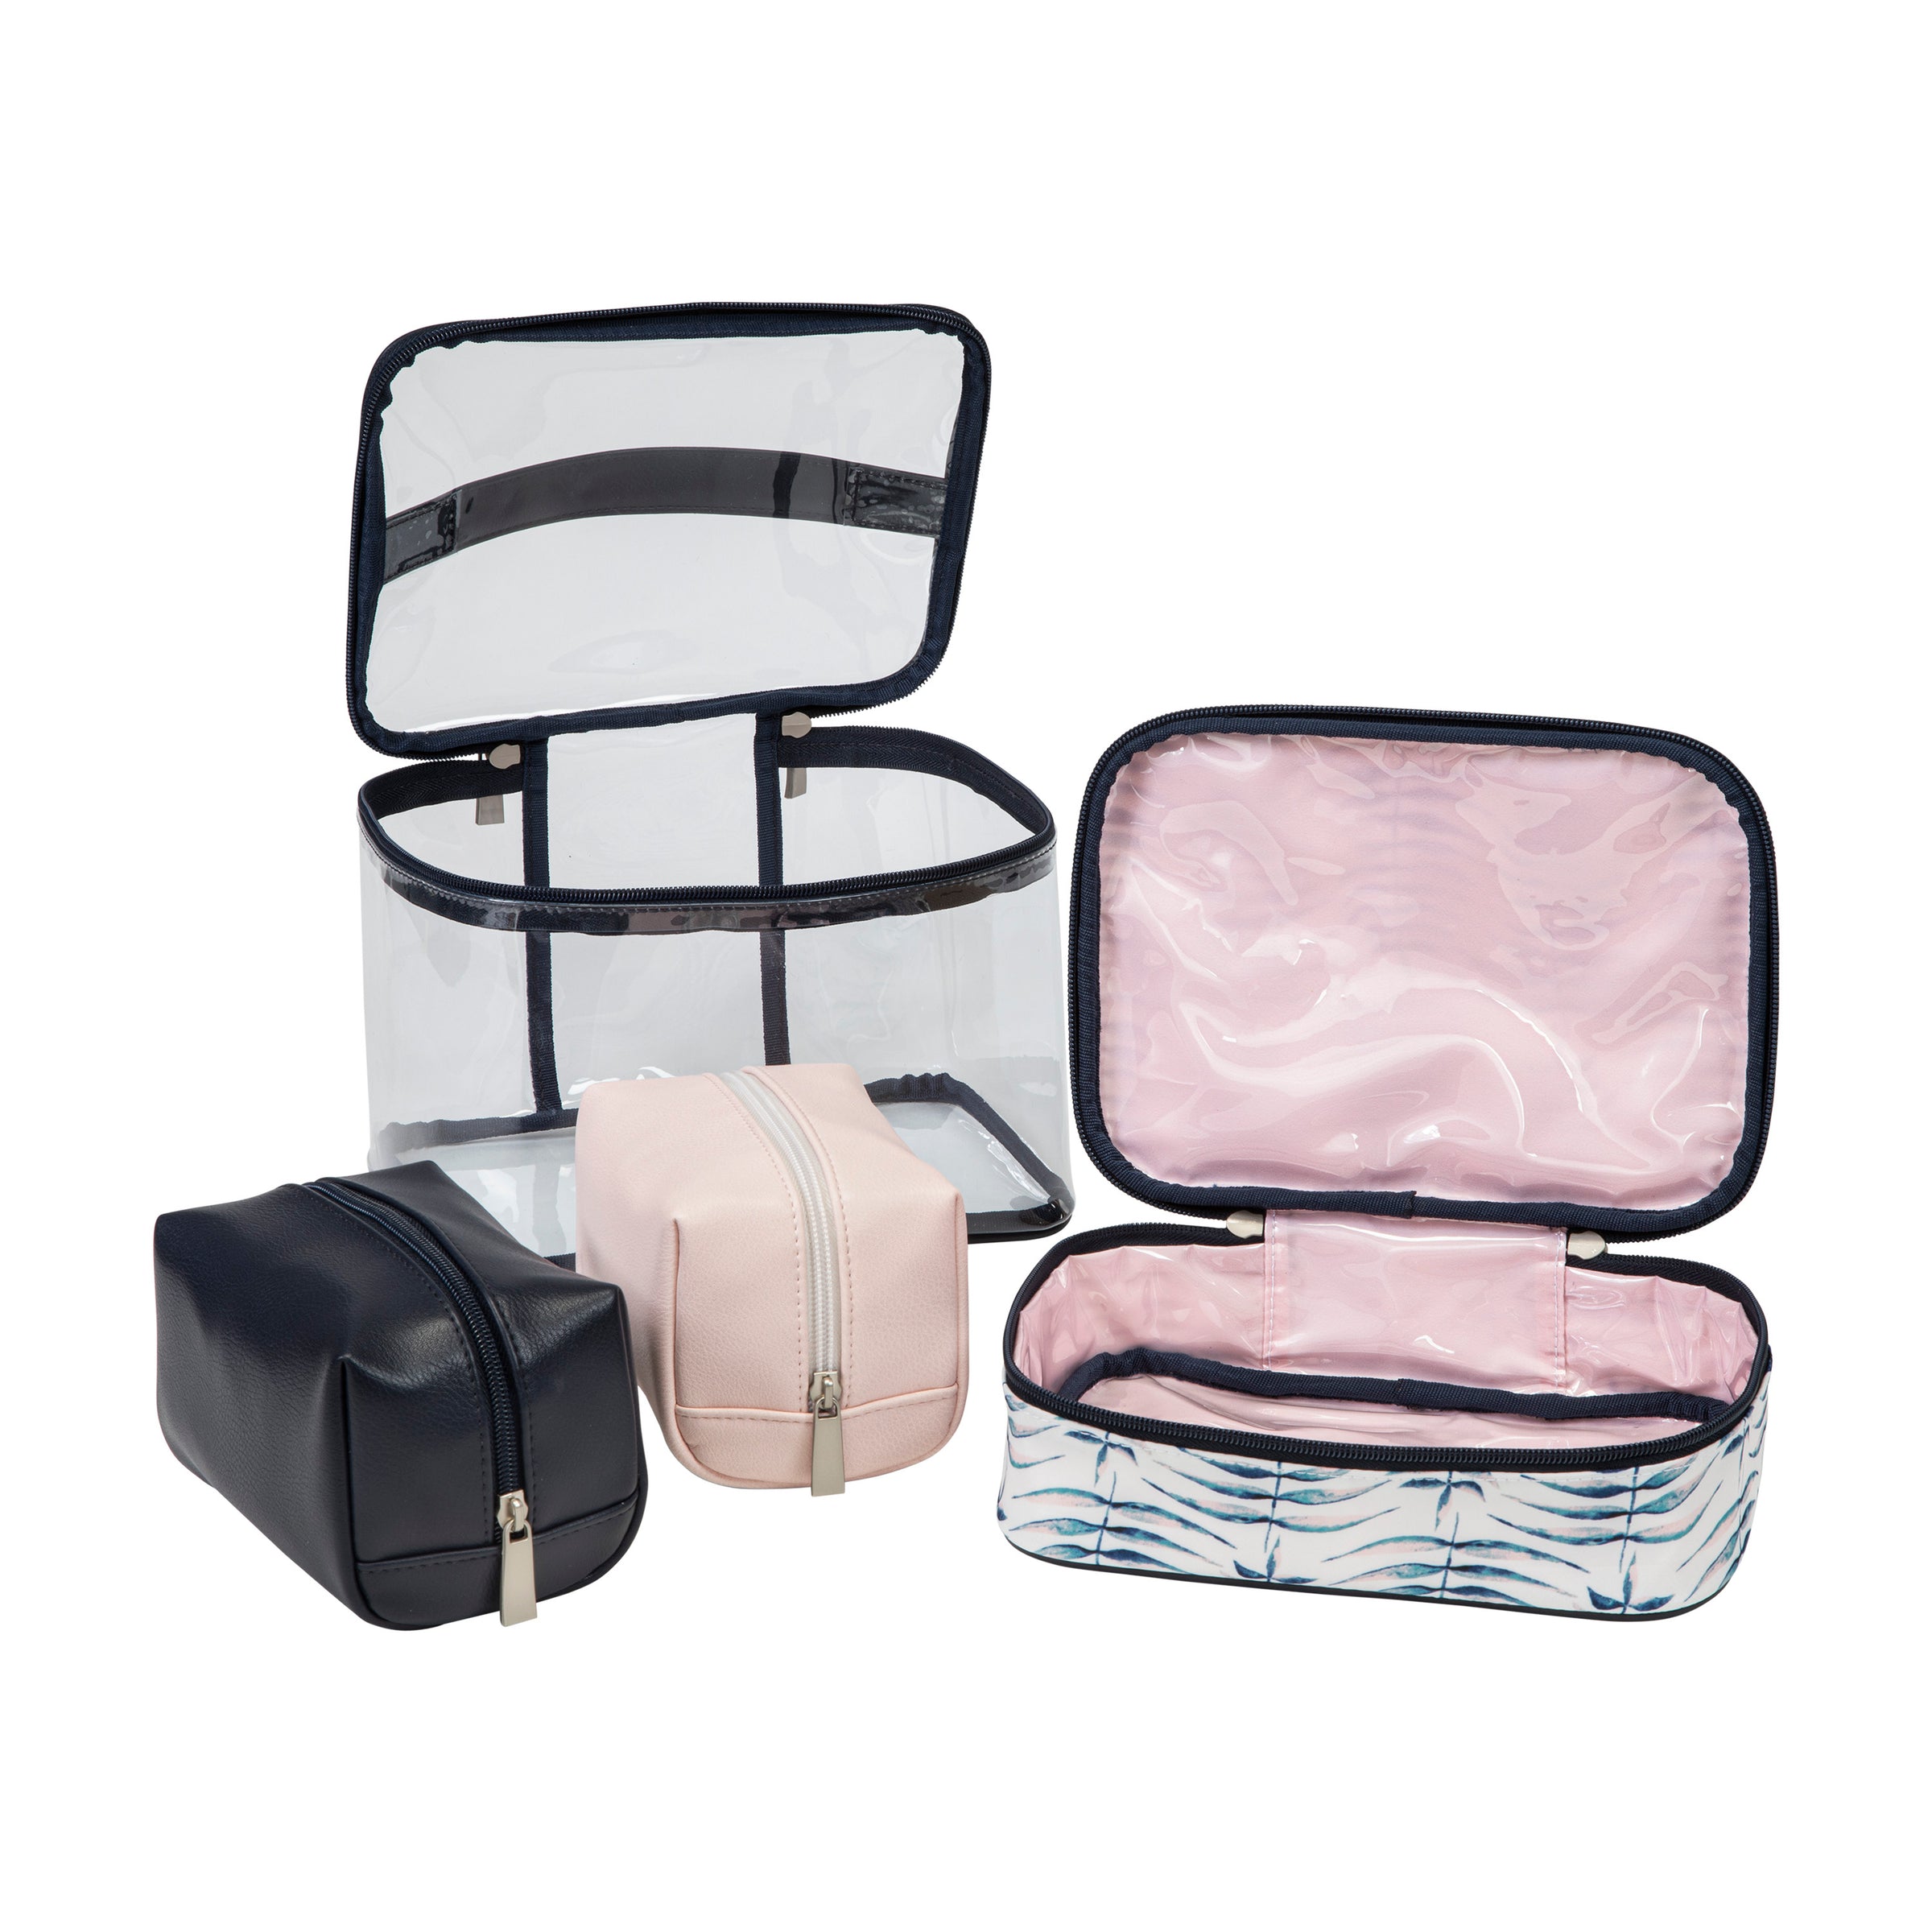 open large clear plastic case and three smaller cosmetics cases